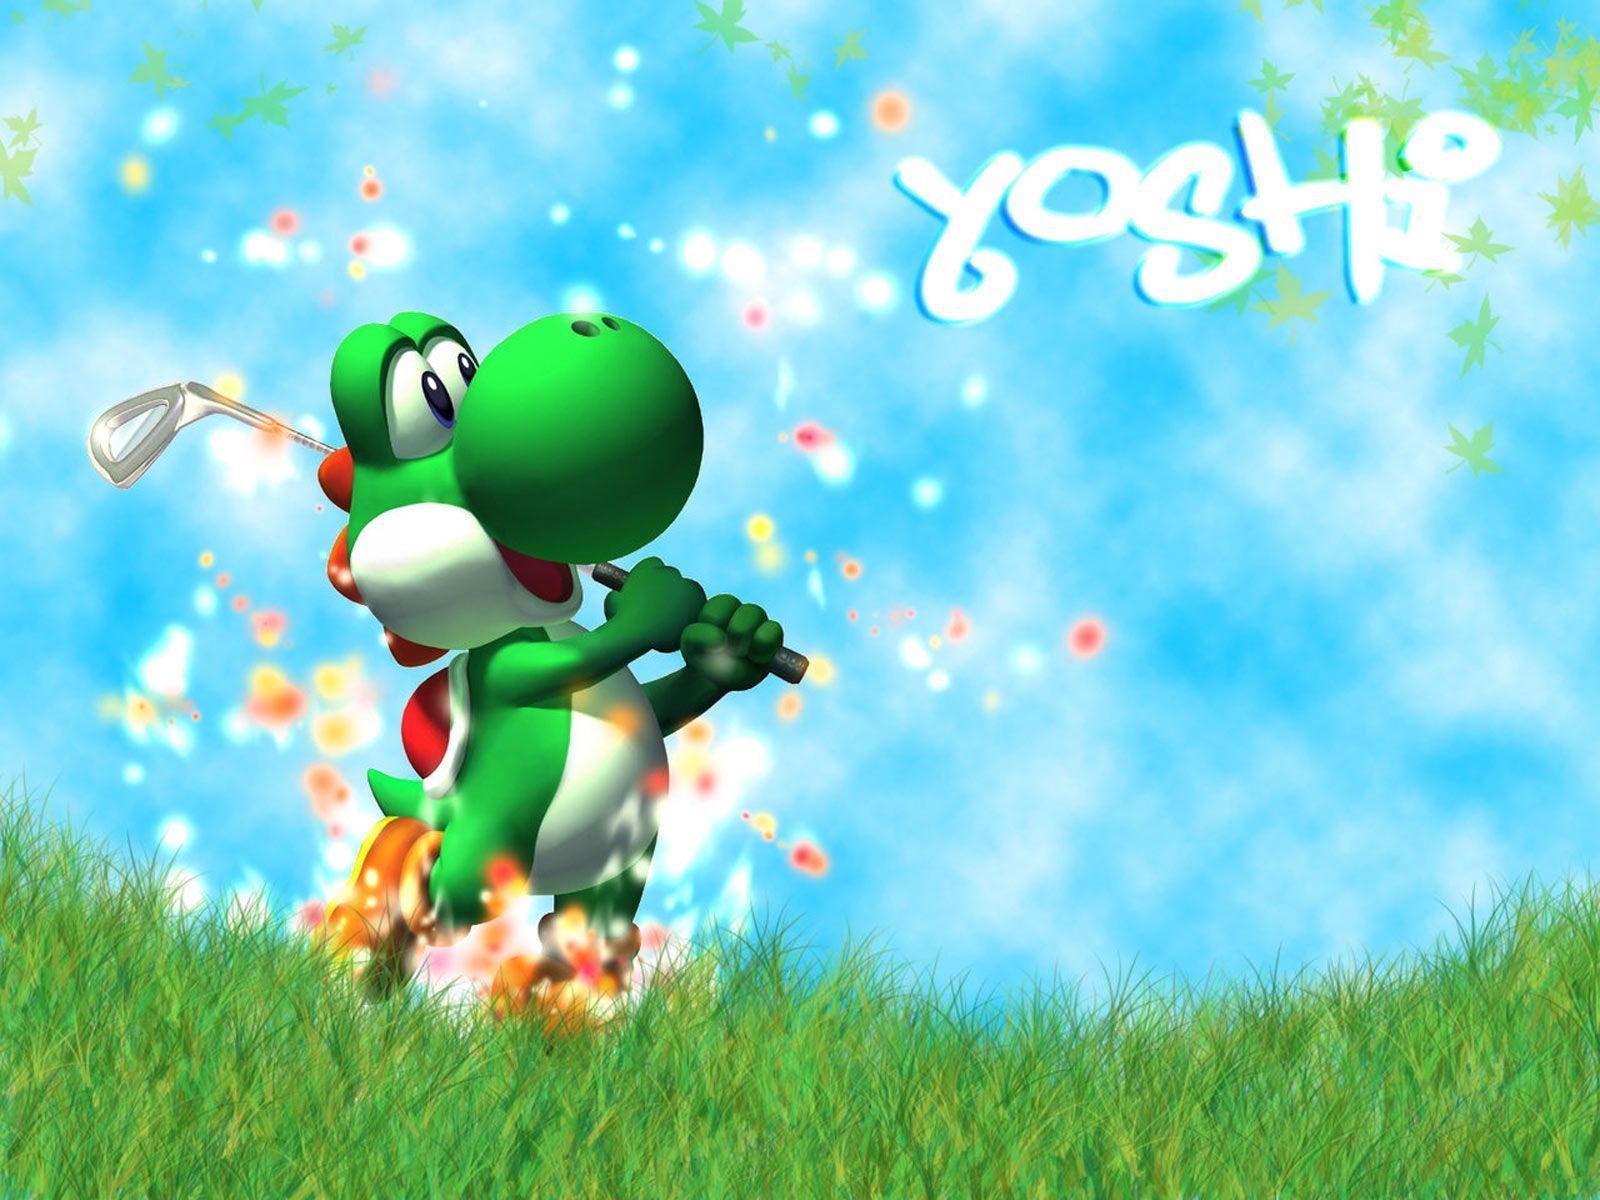 39 Yoshi HD Wallpapers Backgrounds - Wallpaper Abyss